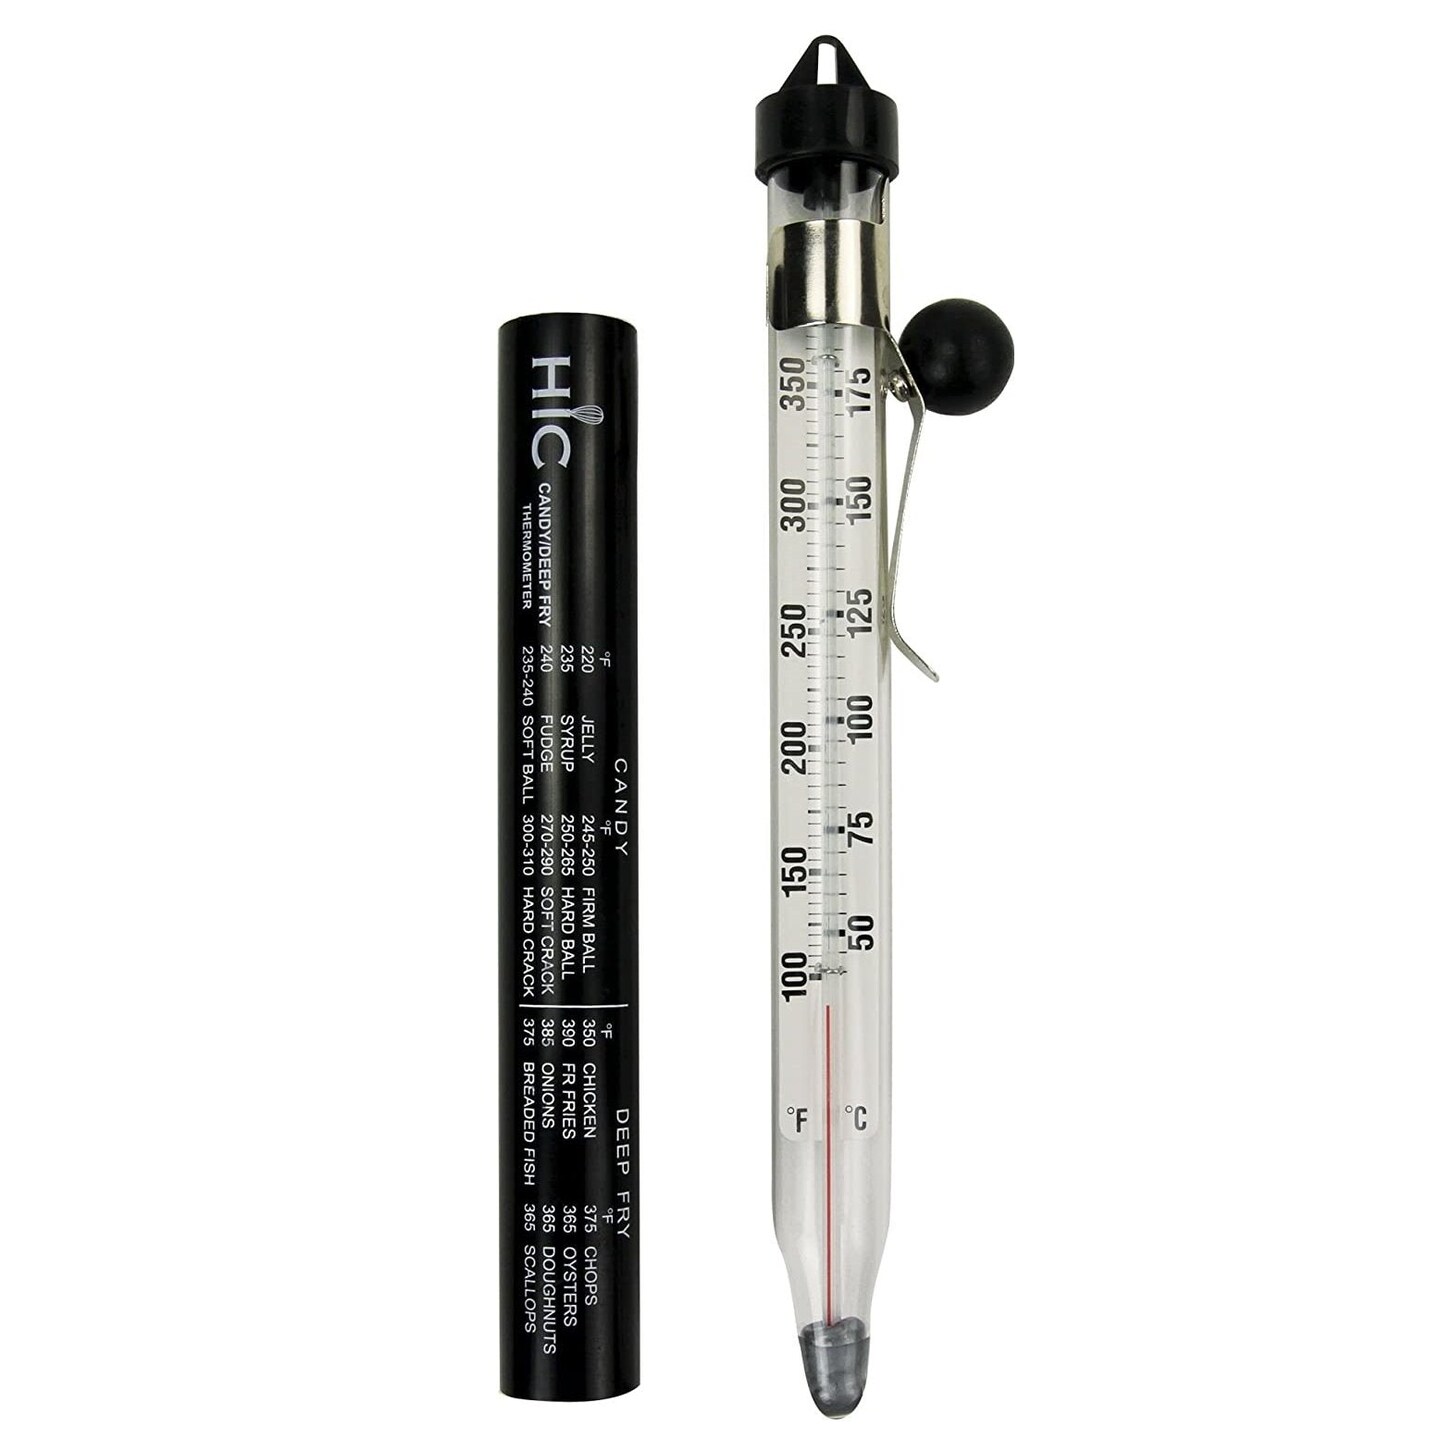 Candy & Deep Fry Thermometer